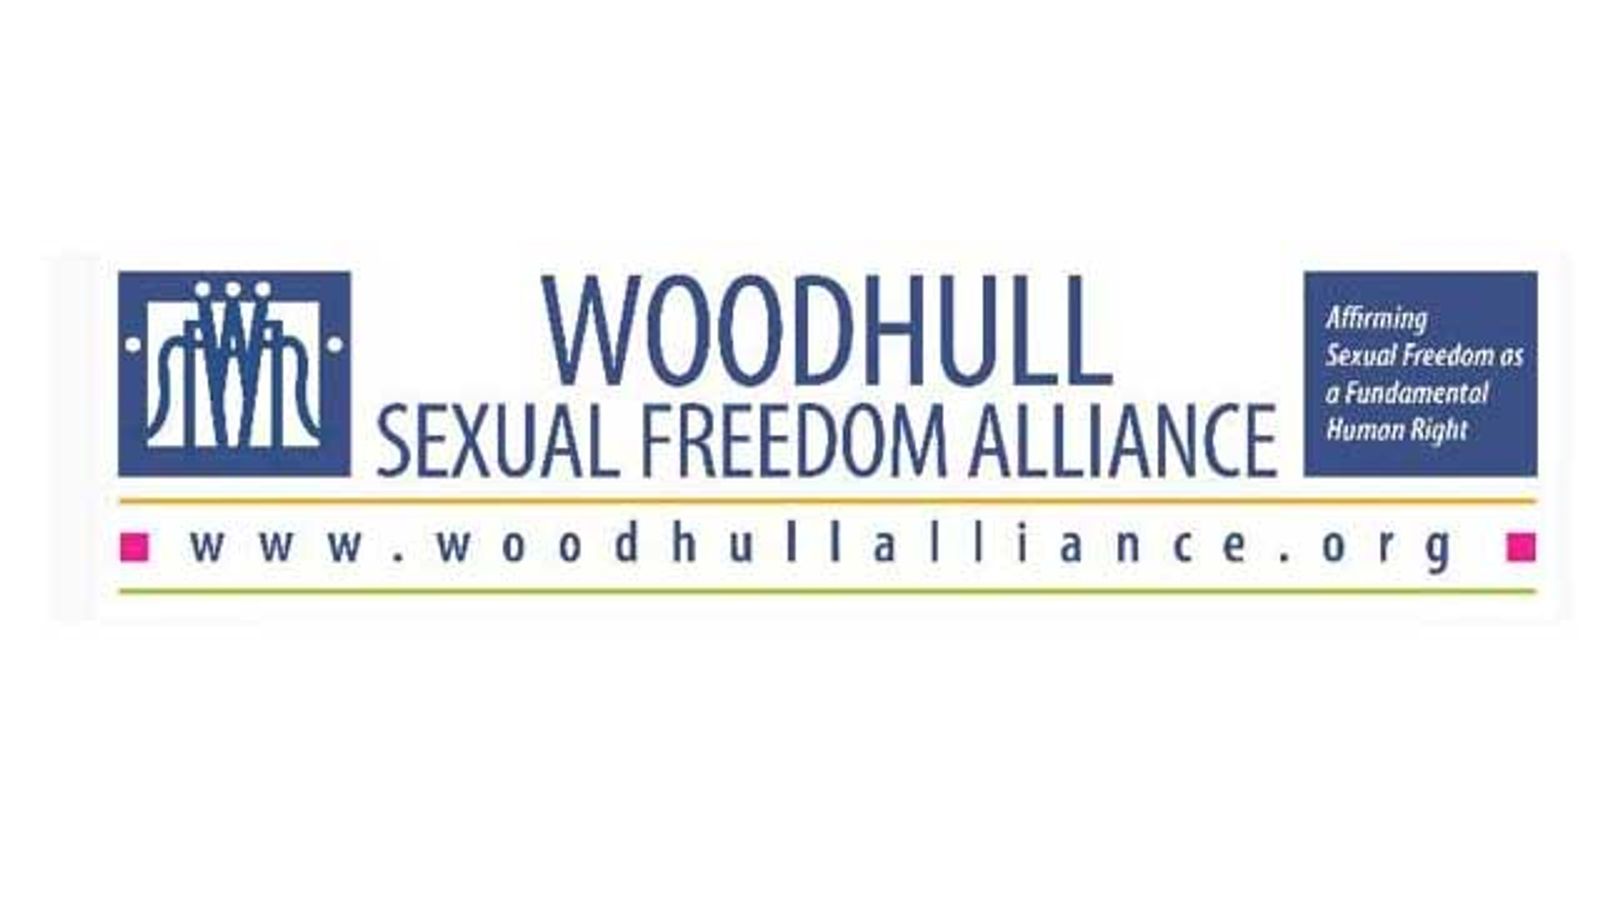 Registration Opens For 2012 Sexual Freedom Summit Sept. 21-23